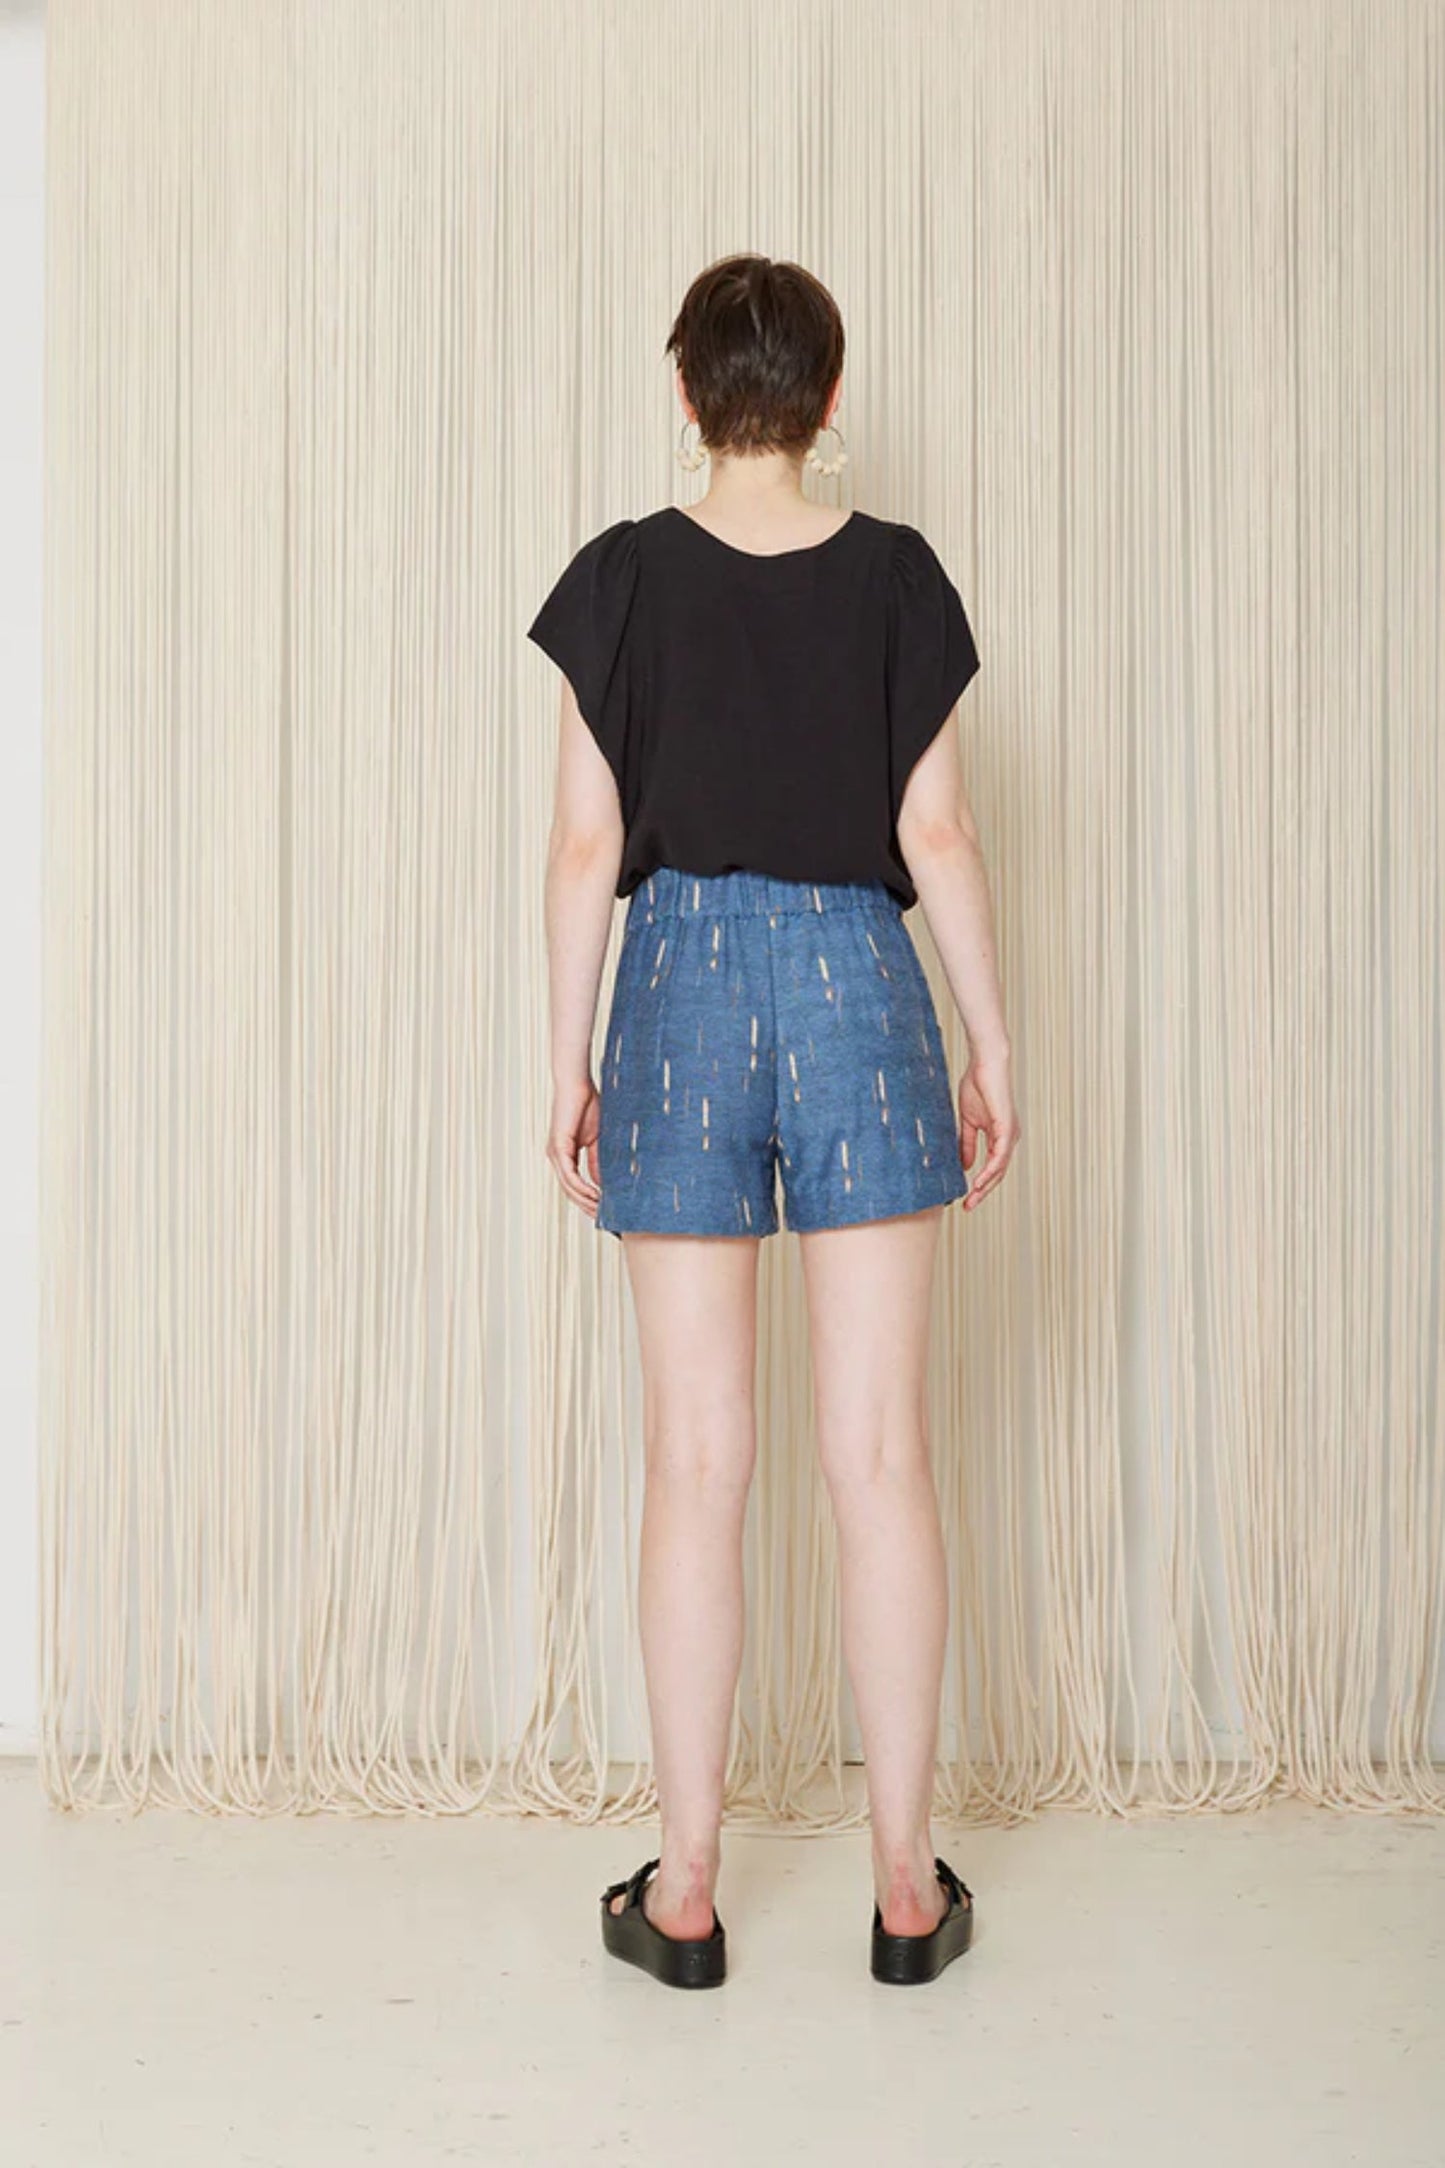 Zinnia Shorts by Cokluch, Youmi Denim, back view, pull-on, elastic waist, pockets, mid-thigh, exclusive fabric, sizes XS to XL, made in Montreal